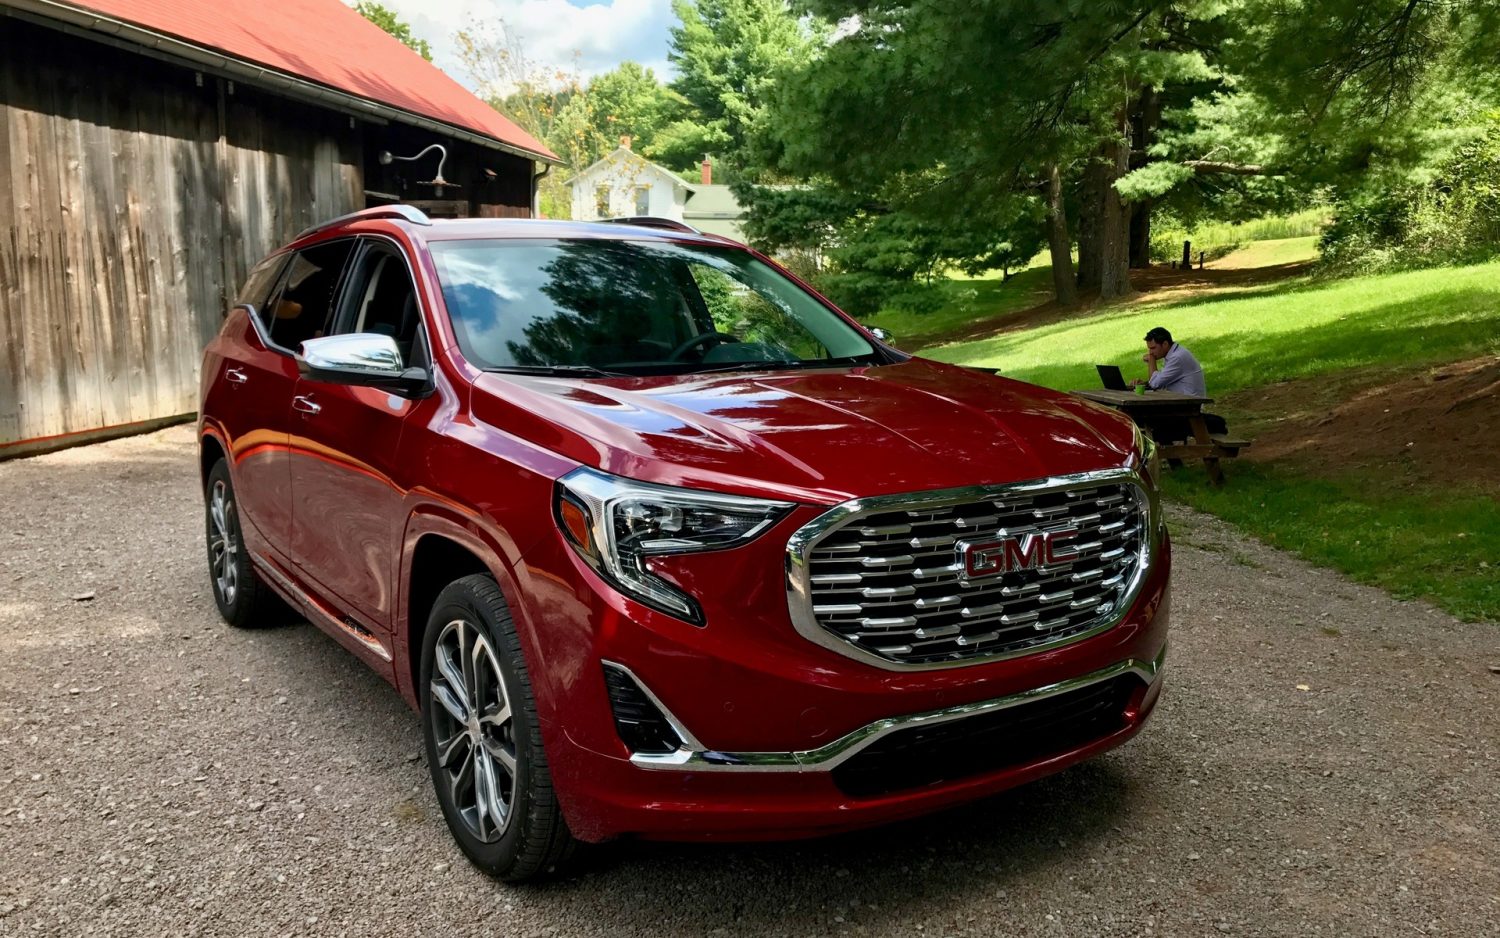 2018 Gmc Terrain Its All About The Marketing